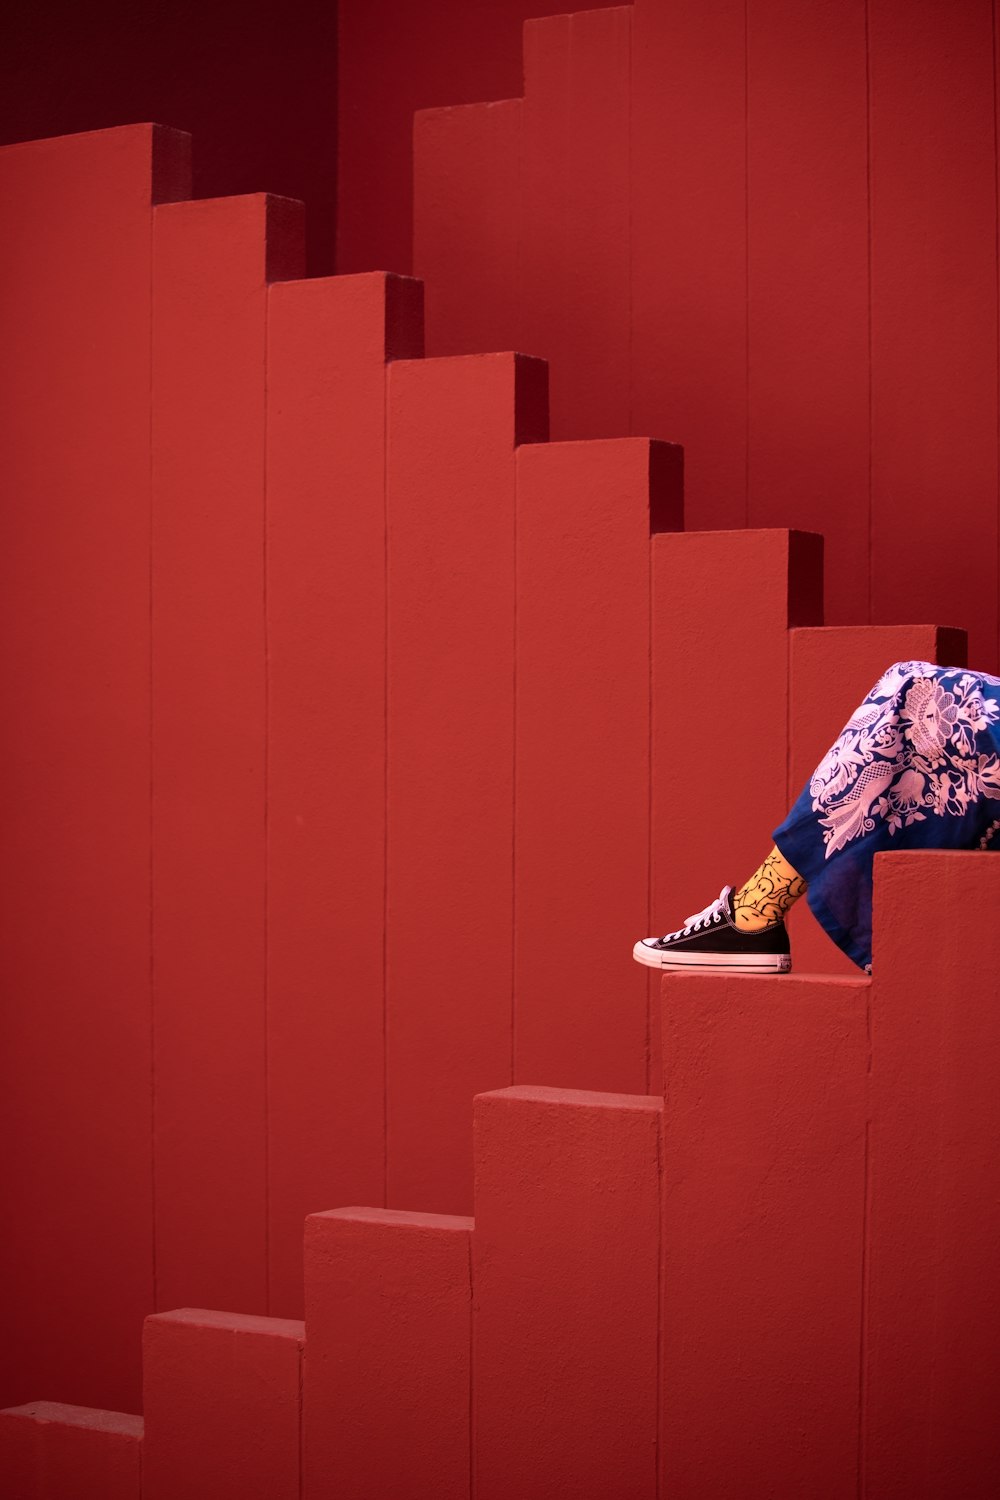 a person is sitting on a stair case